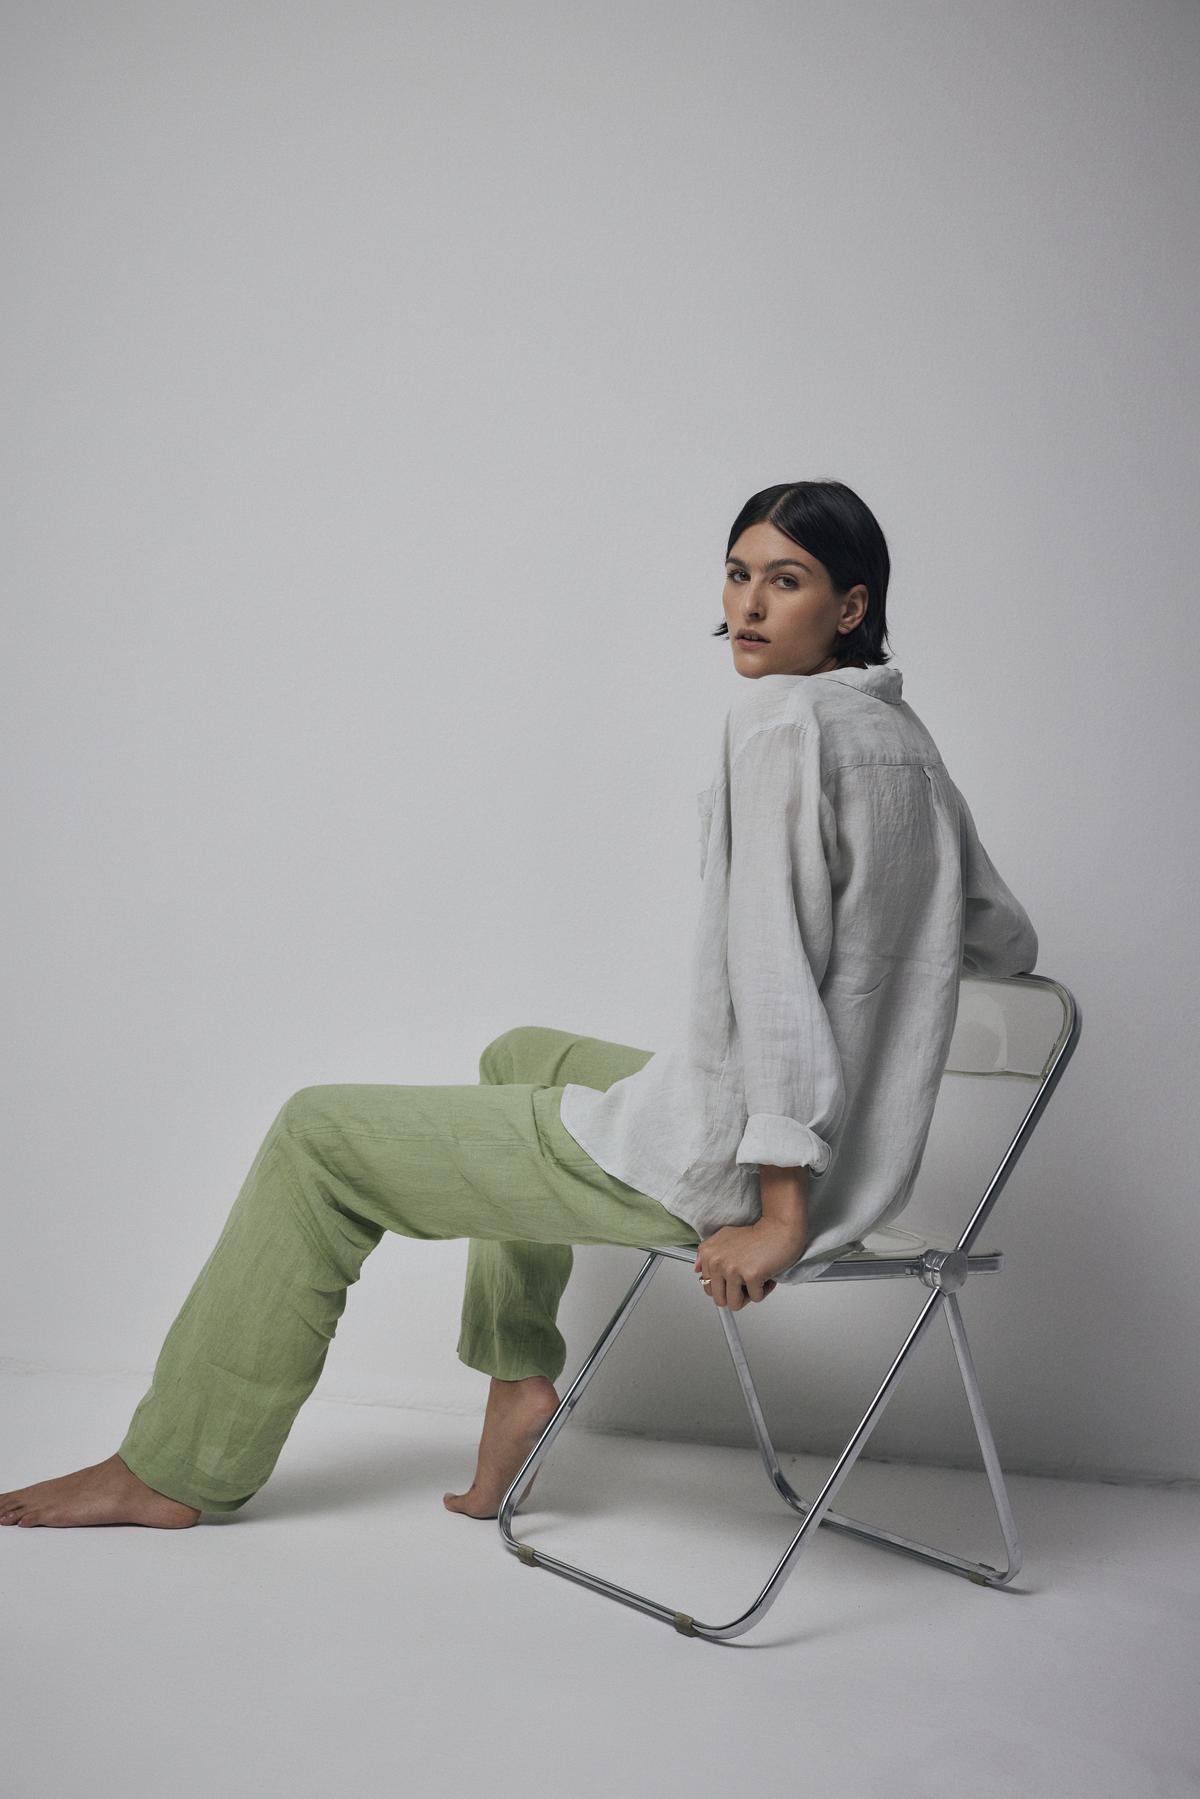   A woman sits on a metal chair against a plain background, wearing a white blouse and Velvet by Jenny Graham's PICO LINEN PANT in green, looking away thoughtfully. 